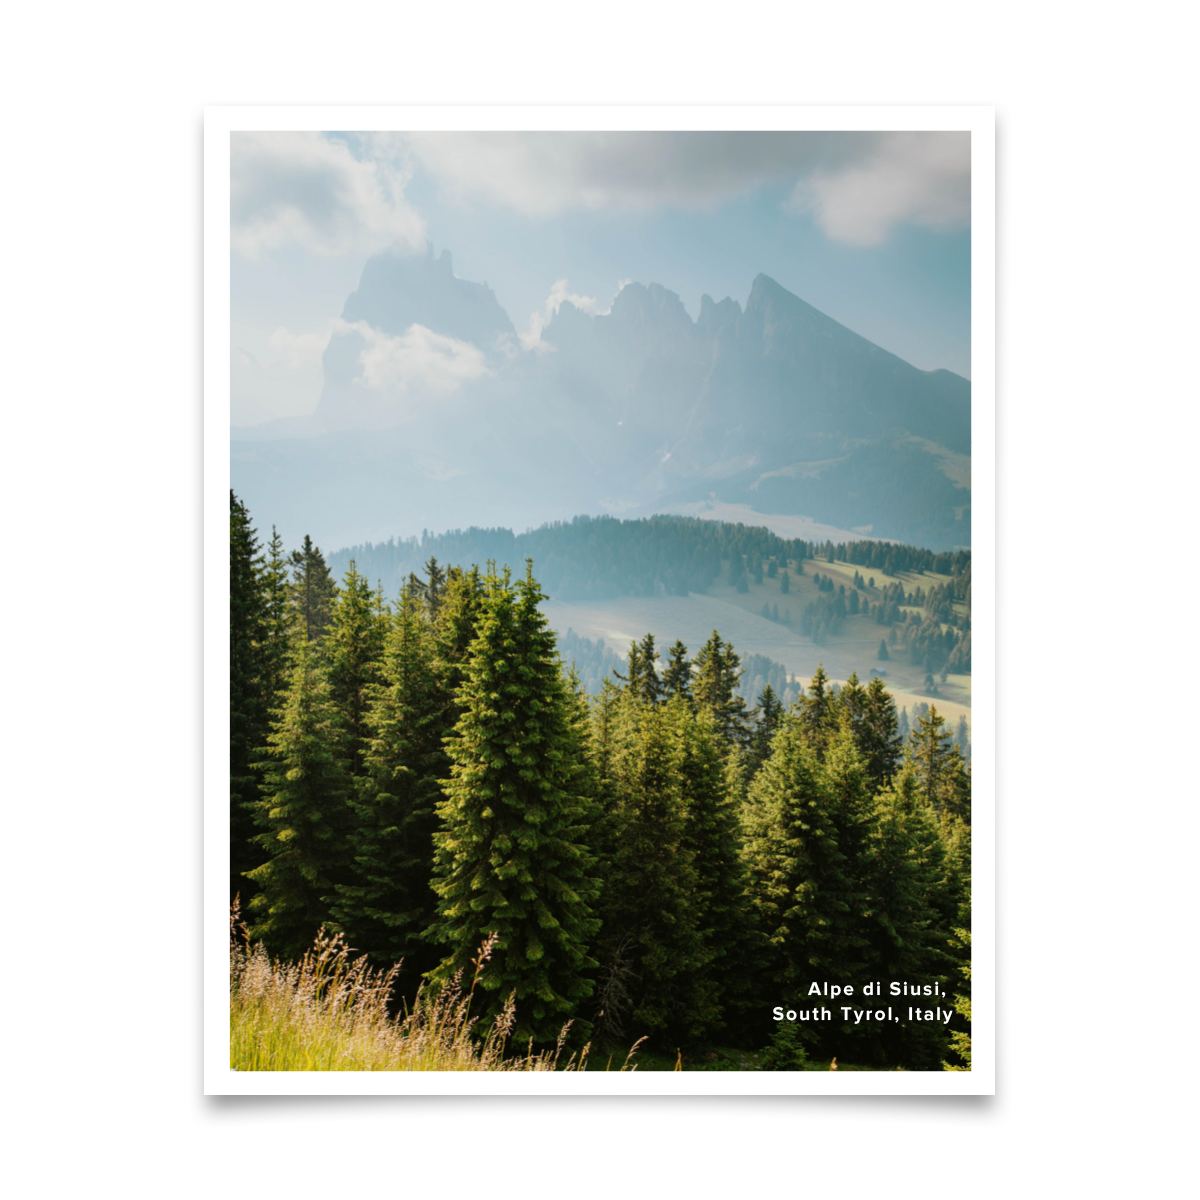 Poster print of lush, green mountain landscape in the Italian Alps